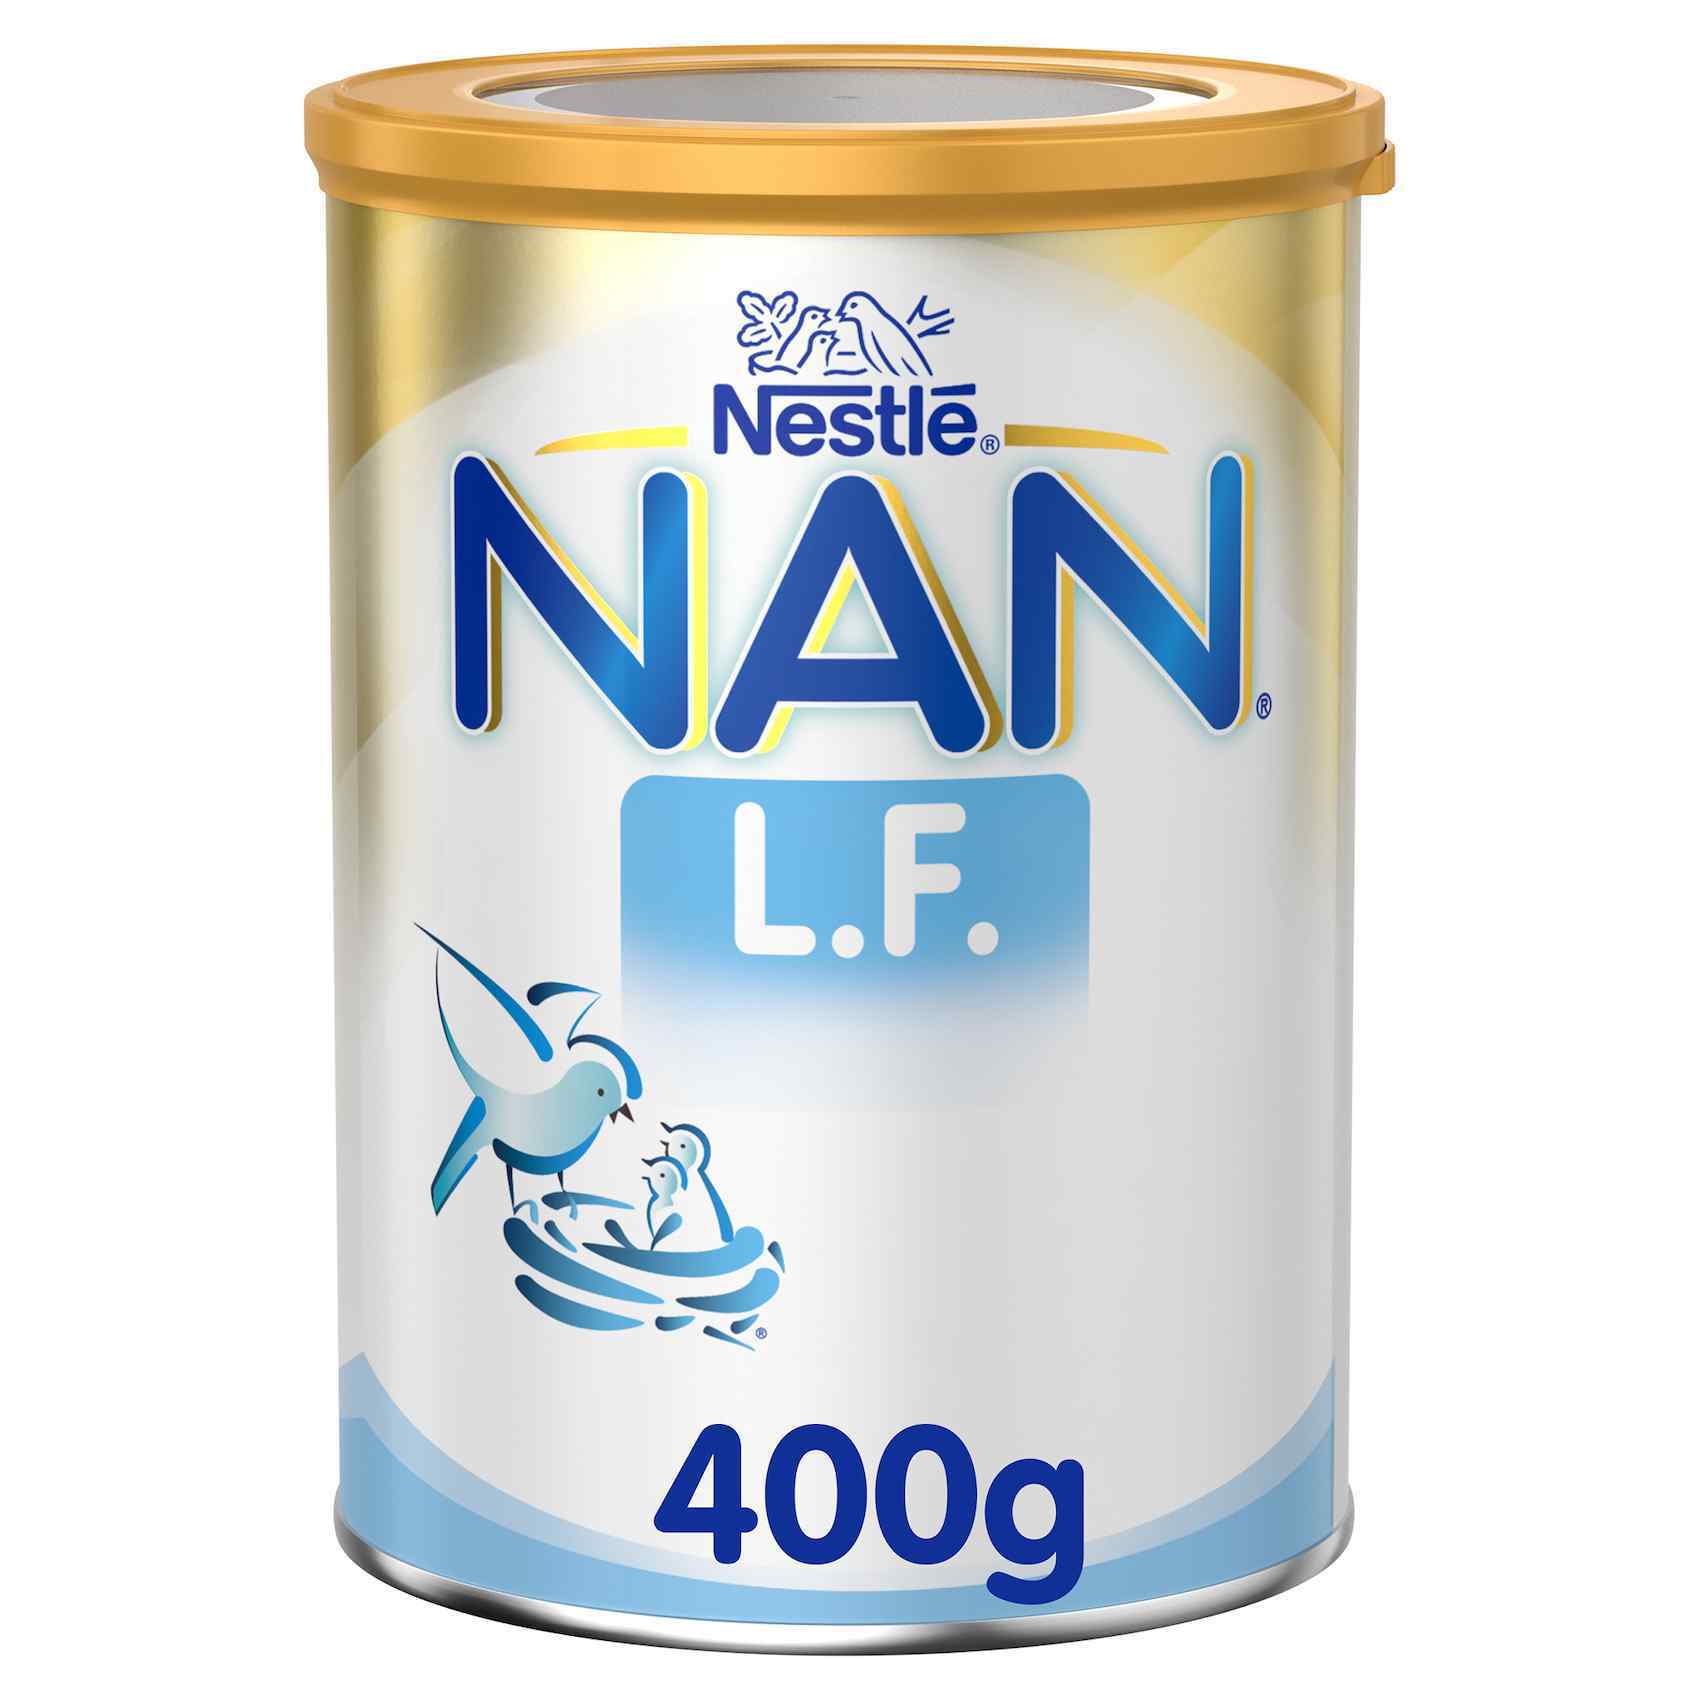 buy nestle nan lactose free infant milk powder 400g online shop baby products on carrefour uae